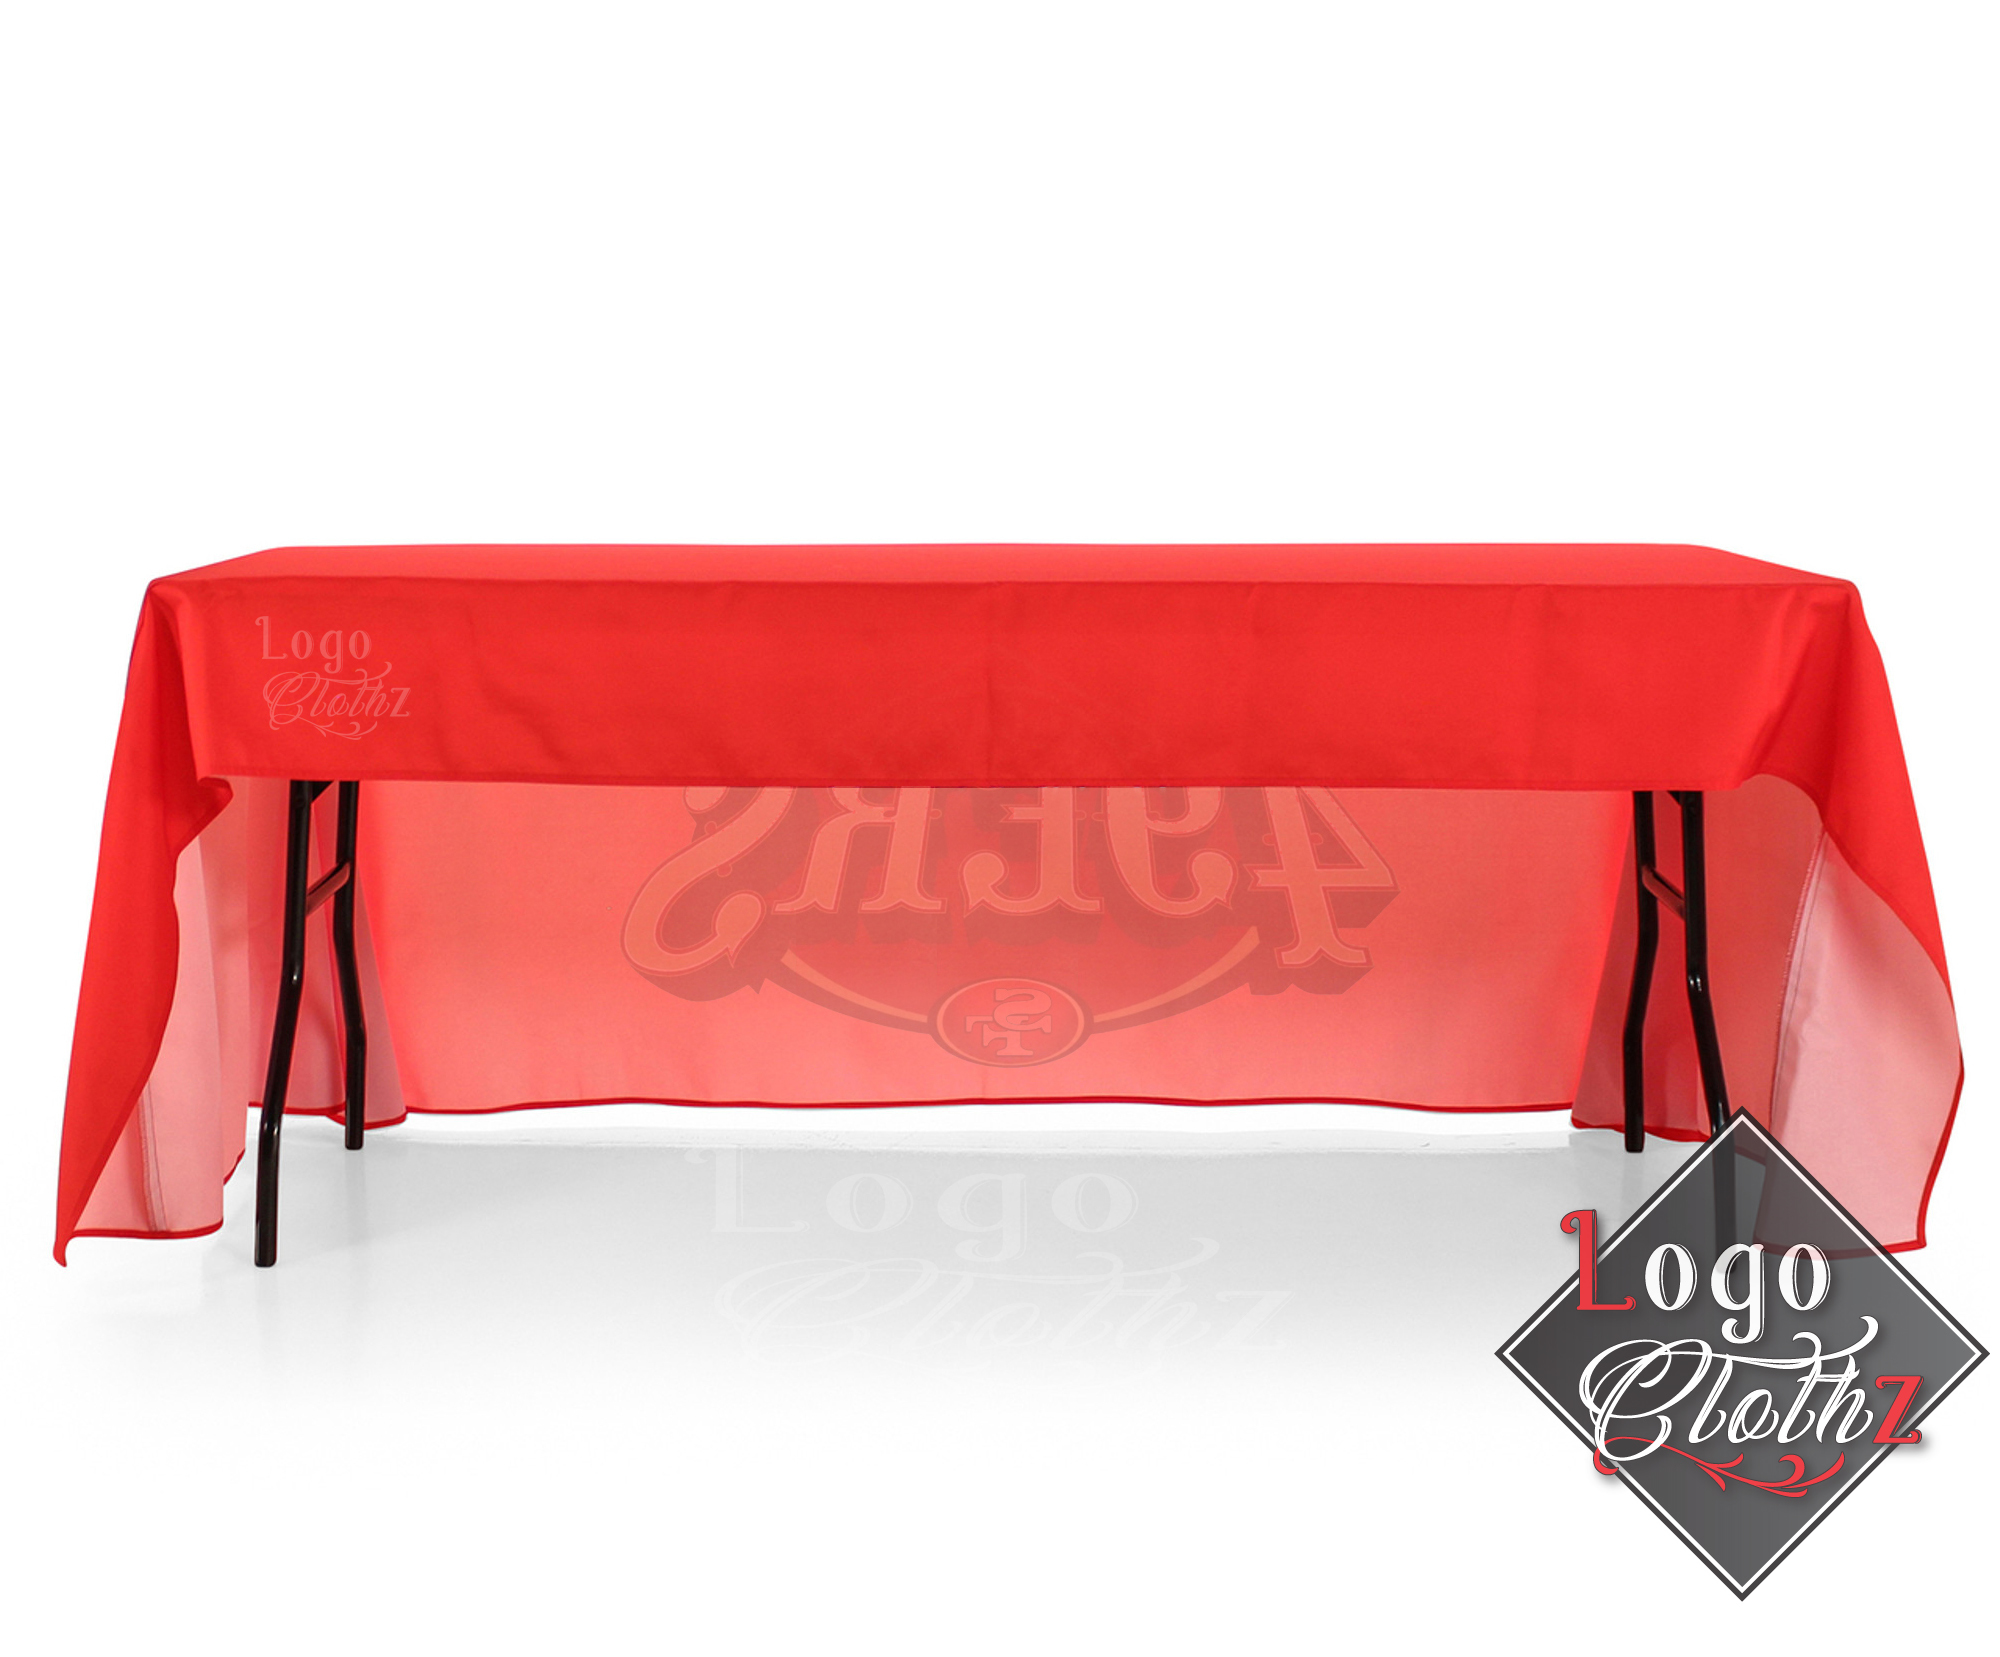 3-sided-tablecloth-with-logo-print.jpg